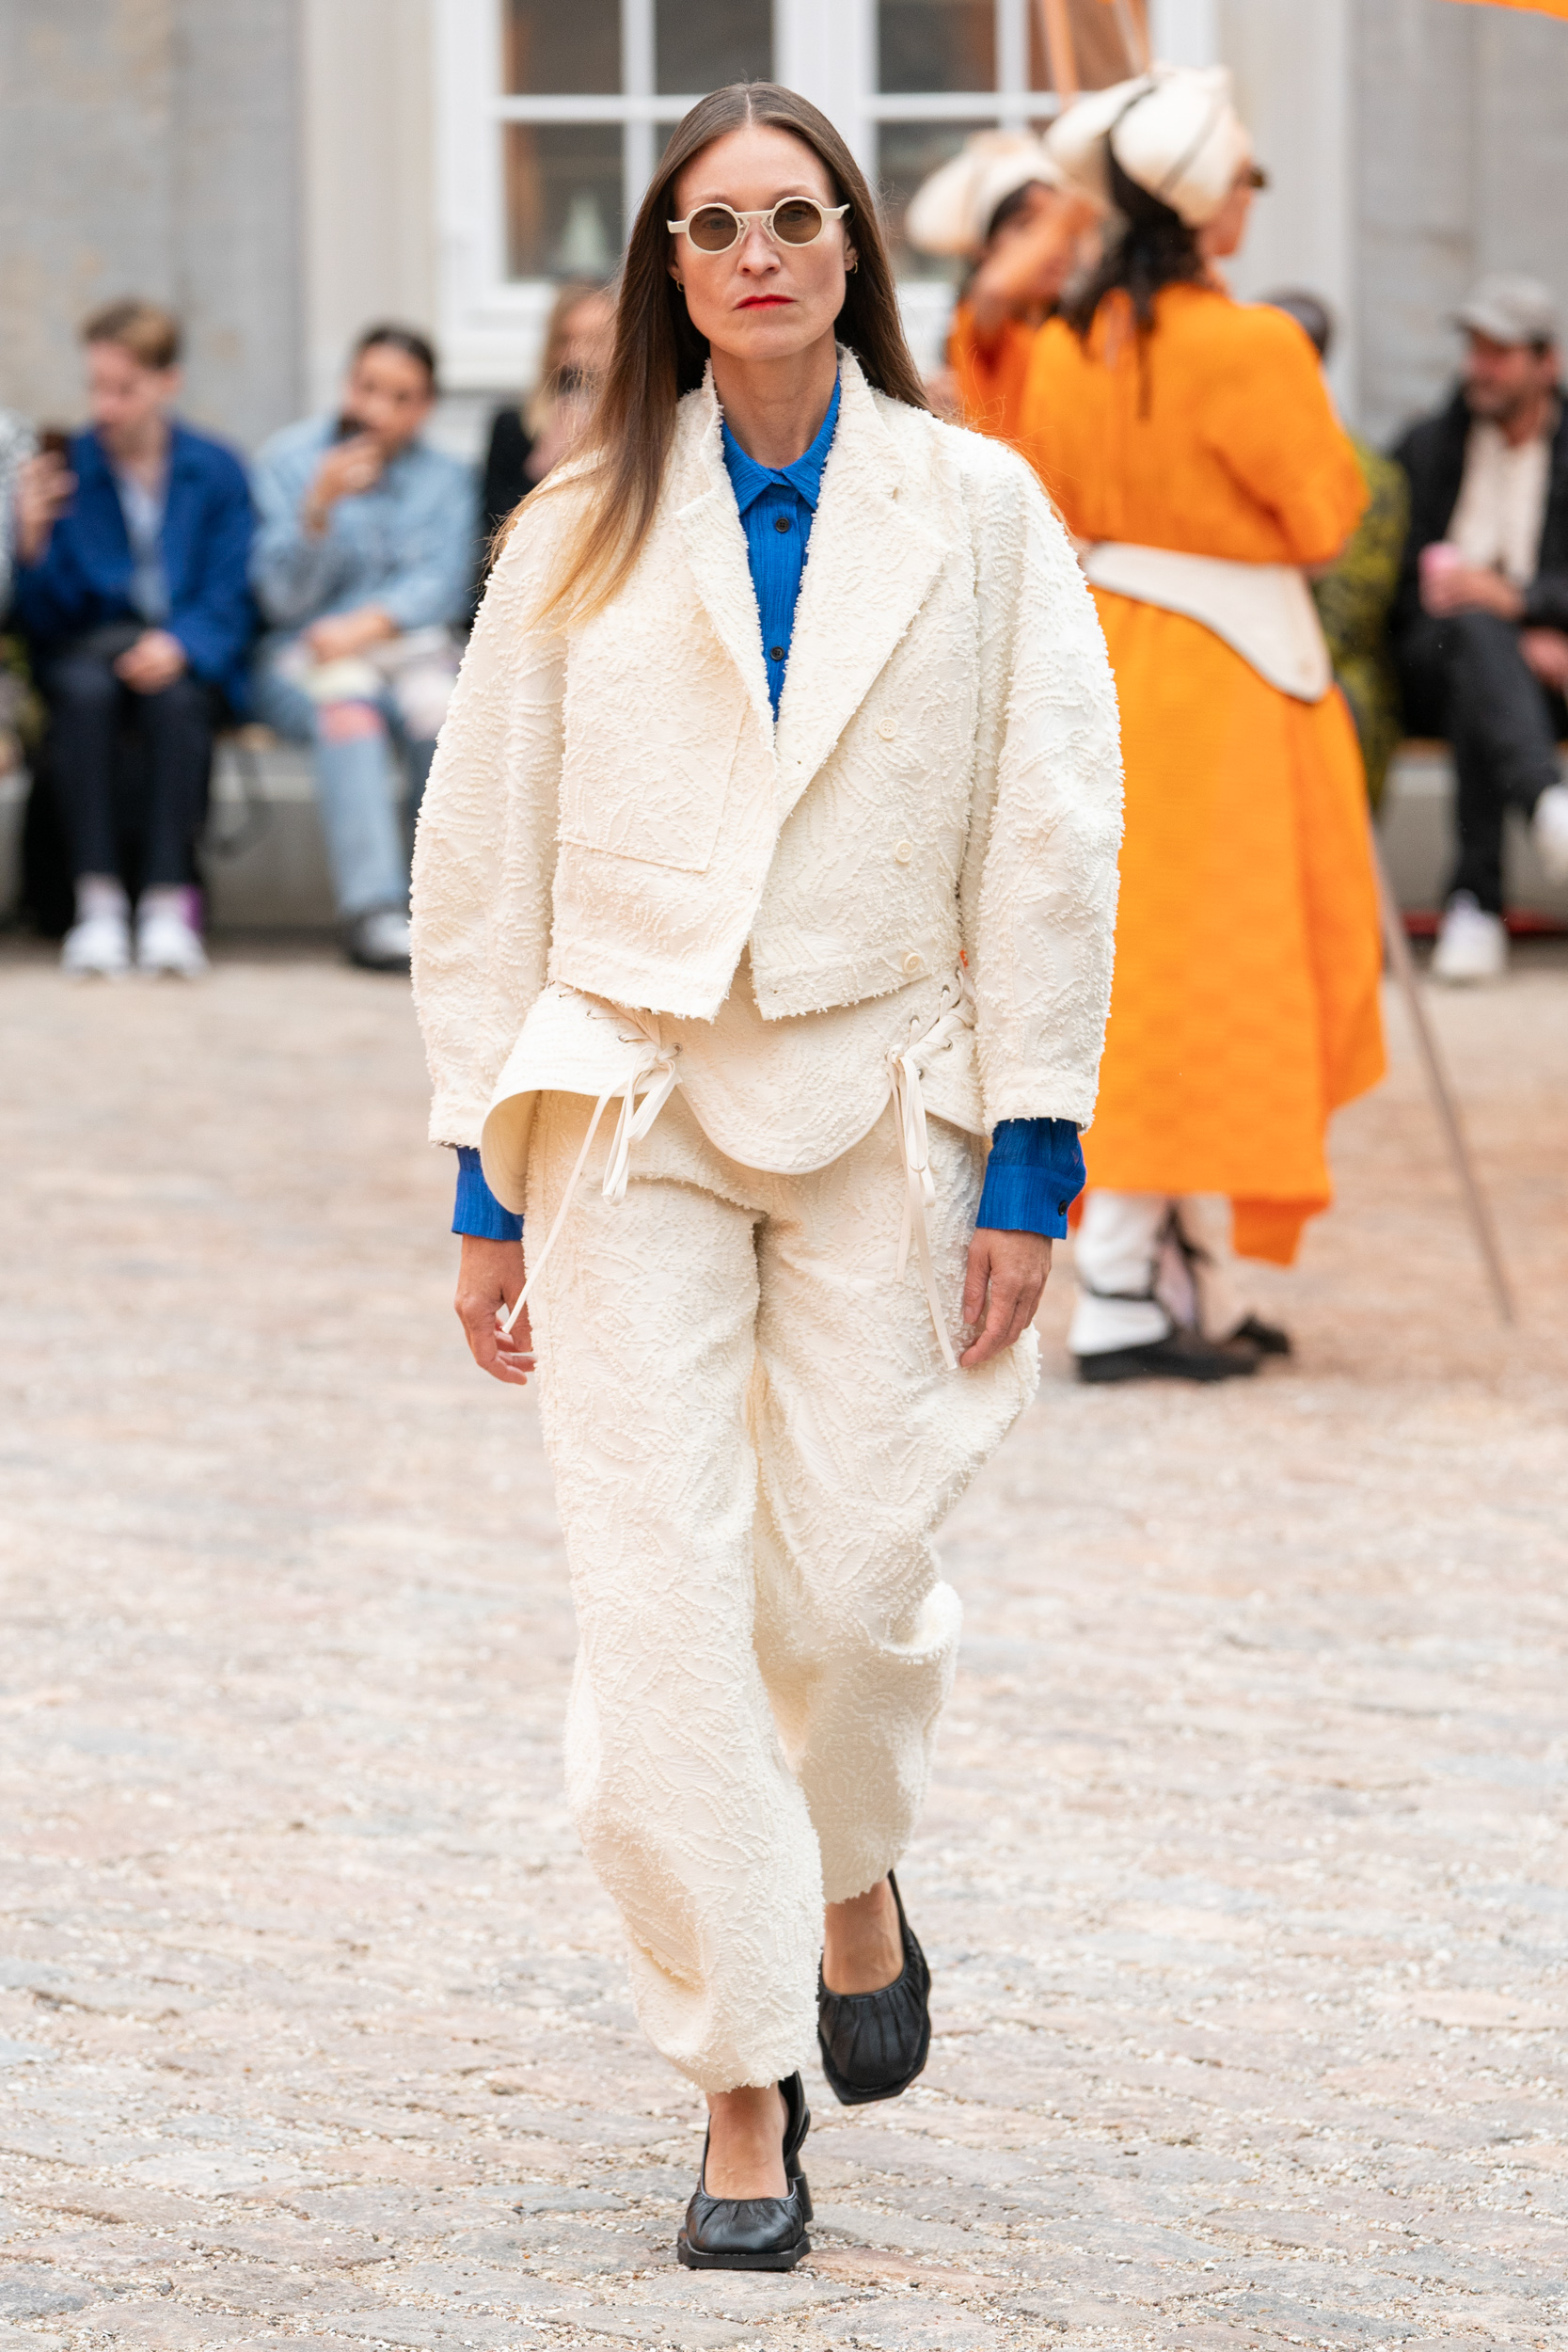 The Best Looks from Copenhagen Fashion Week | The Impression